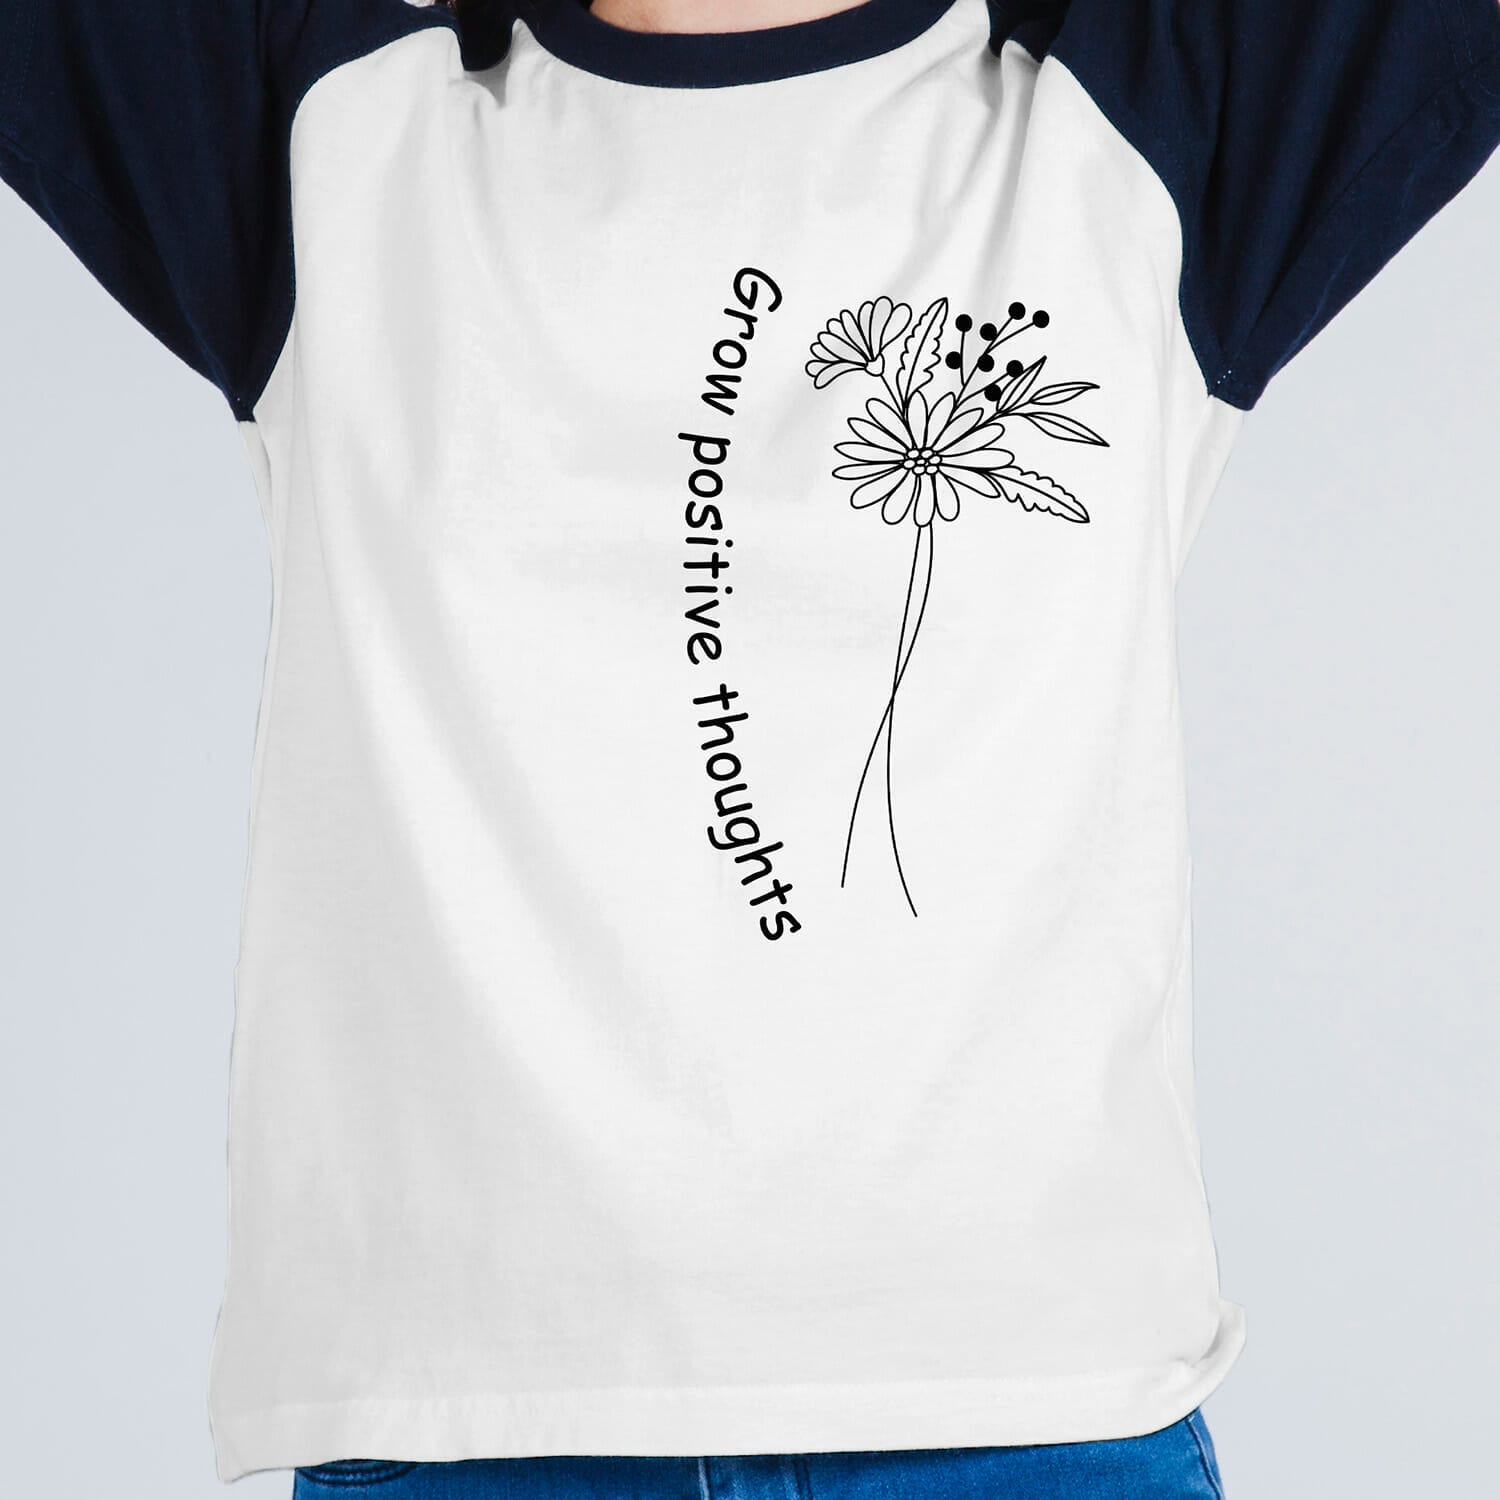 Grow Positive Thoughts Motivational Tshirt design